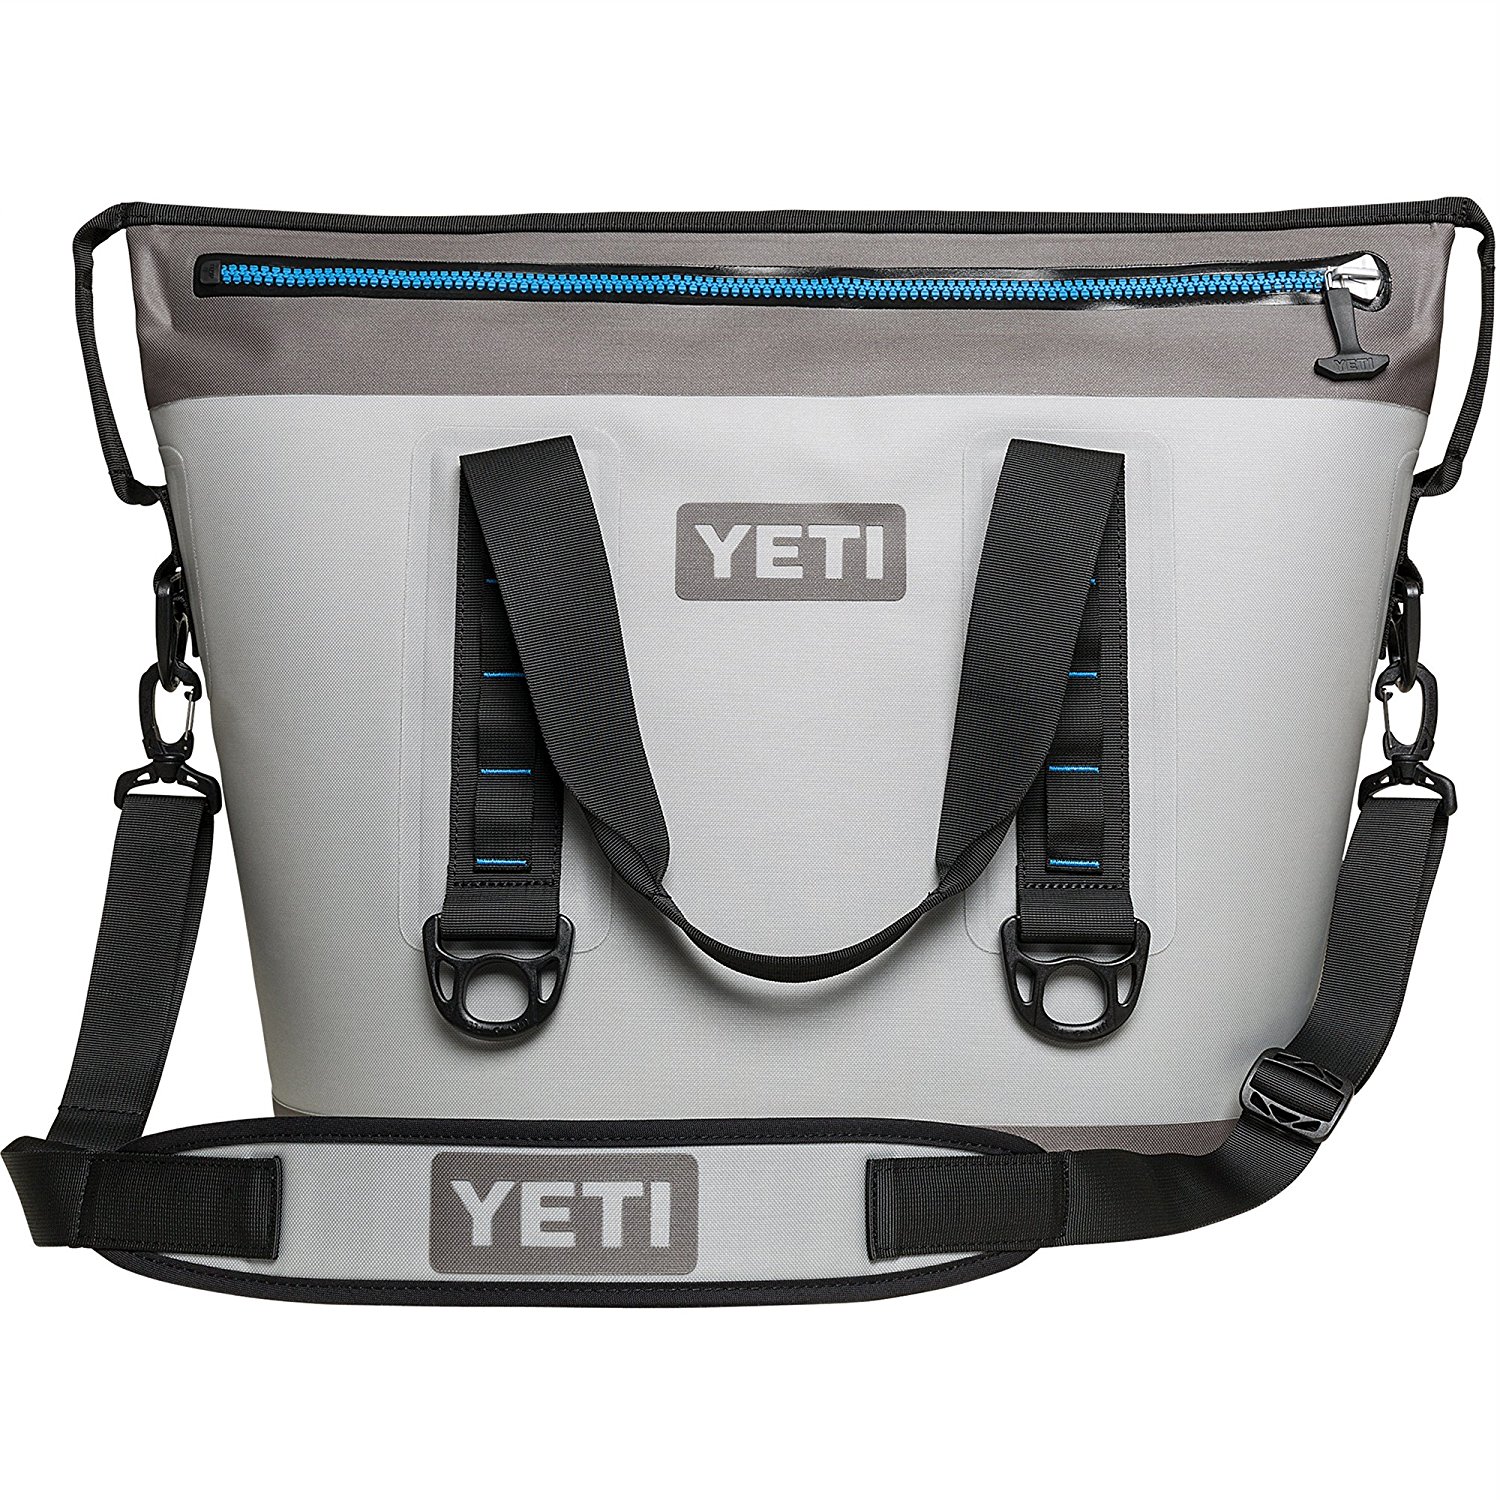 cheapest price on yeti coolers